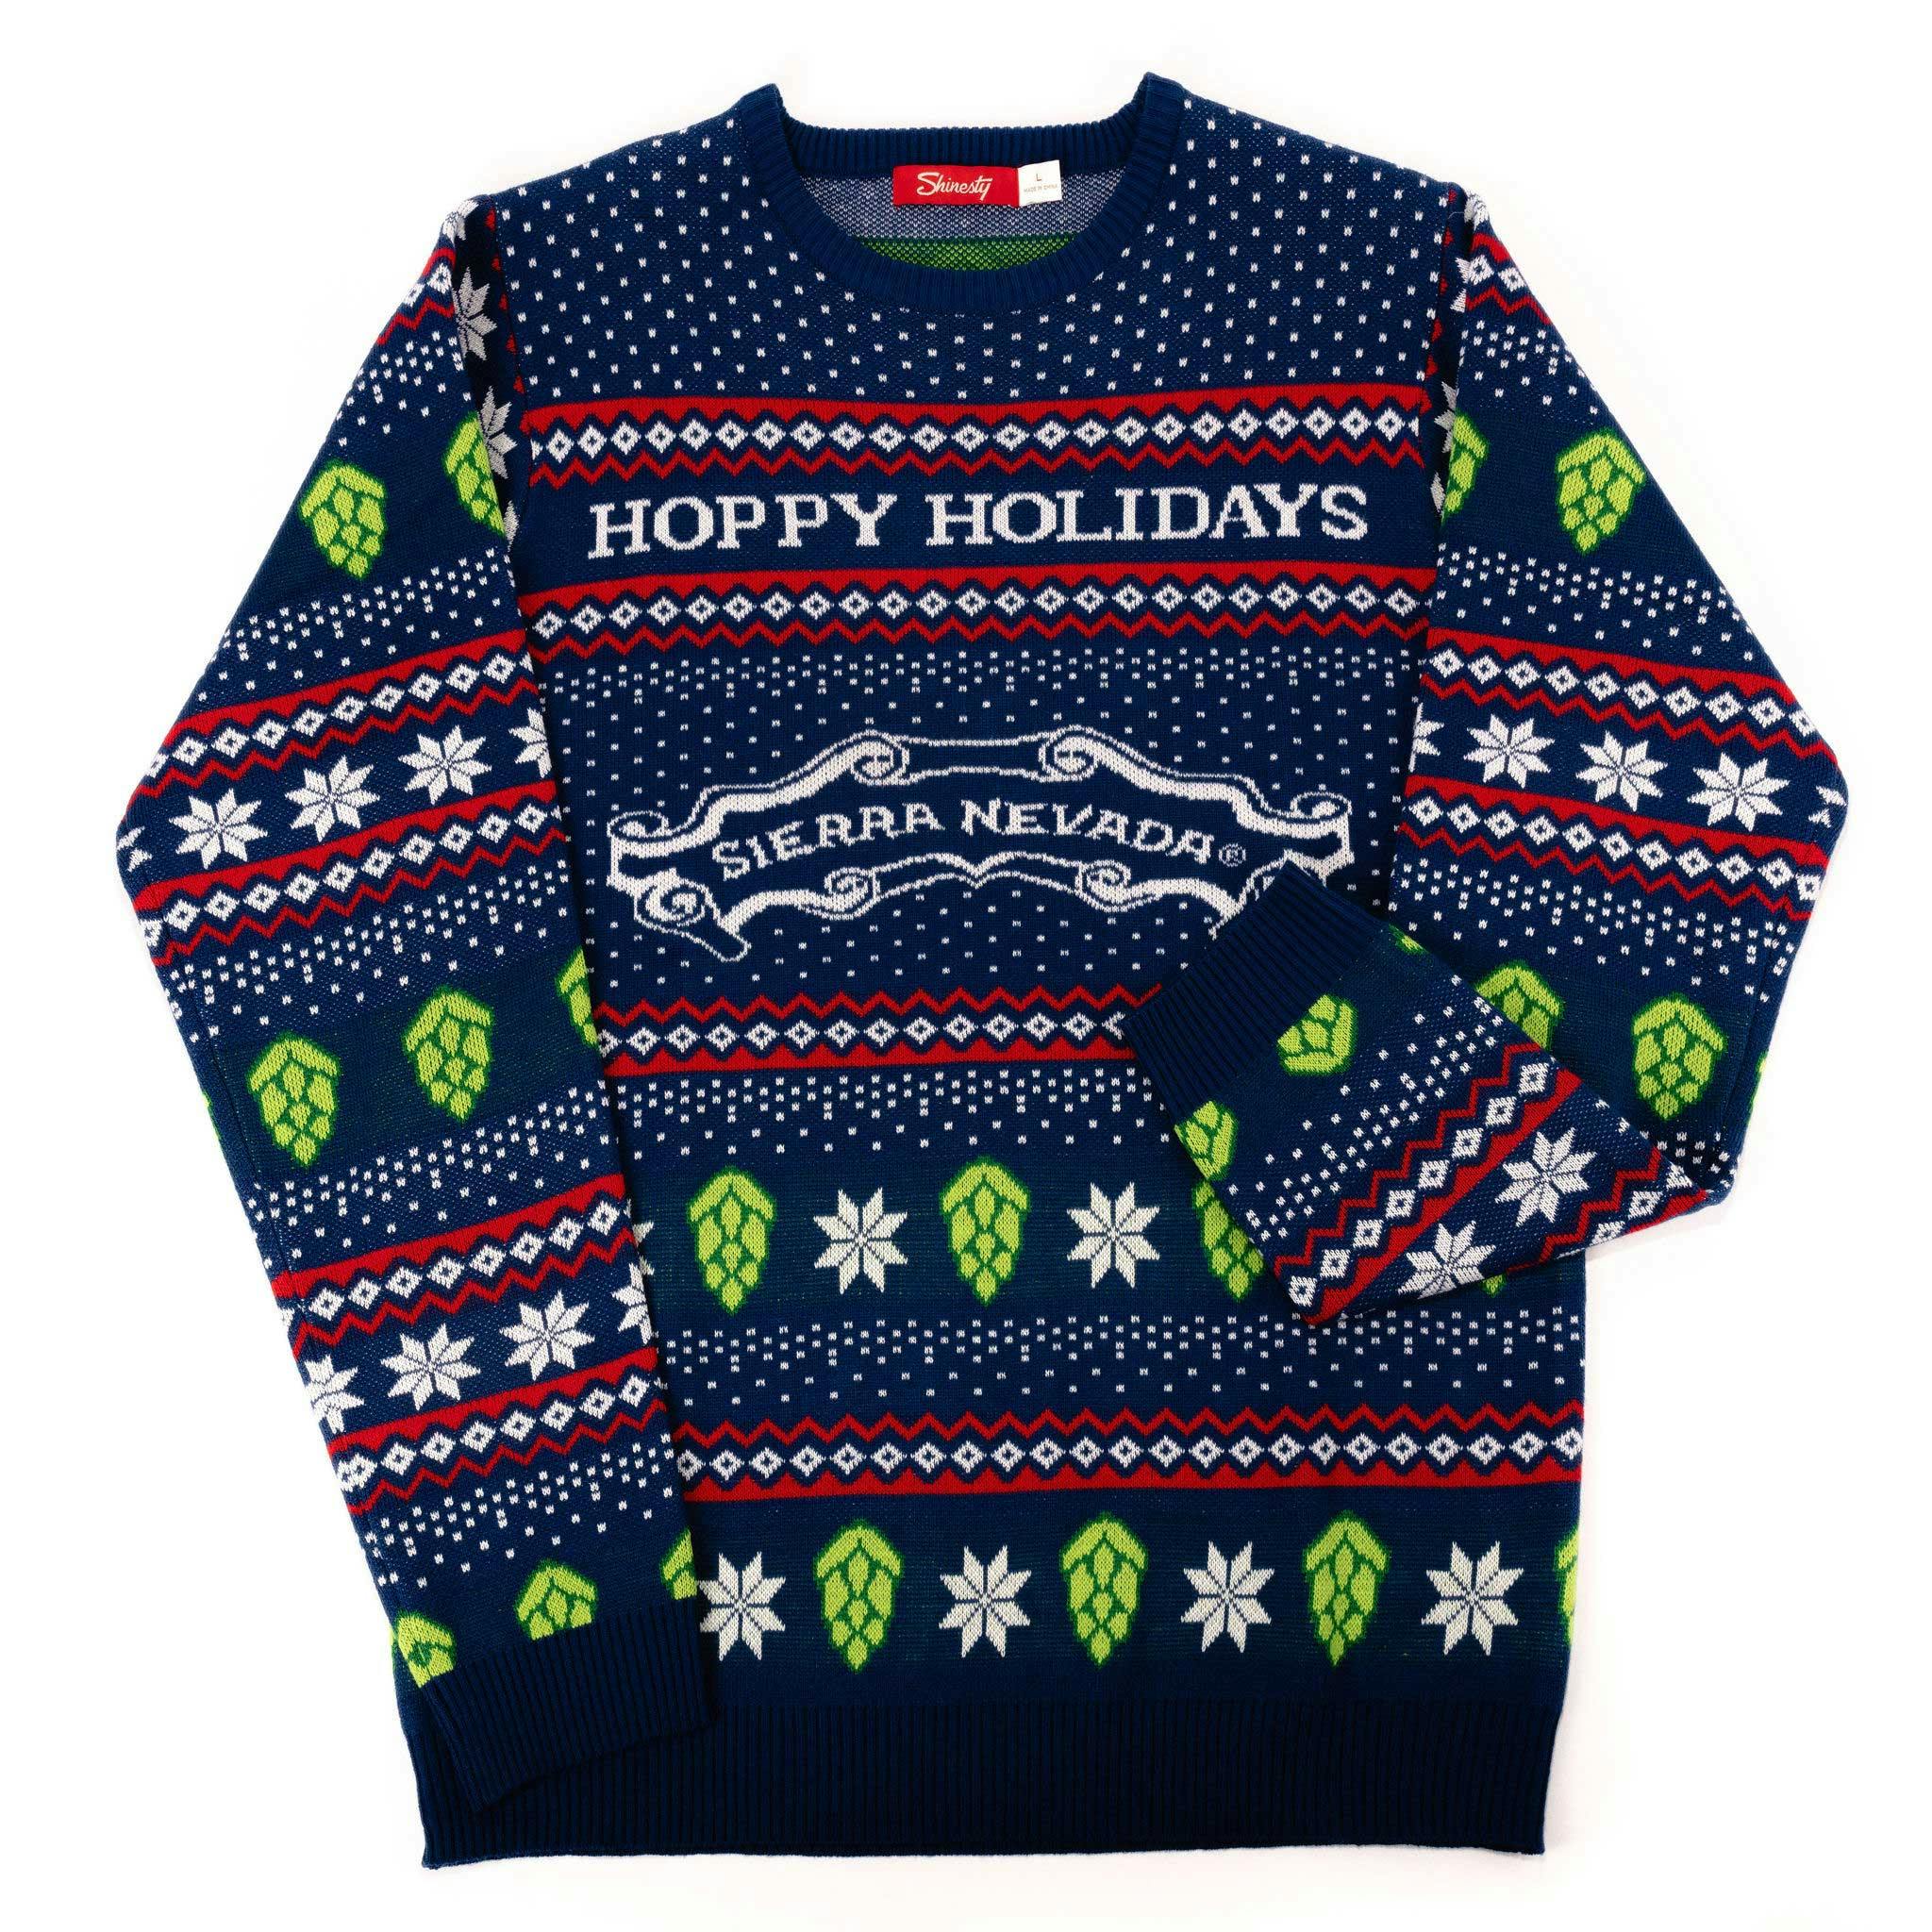 Front view of Sierra Nevada holiday knit sweater with hop pattern